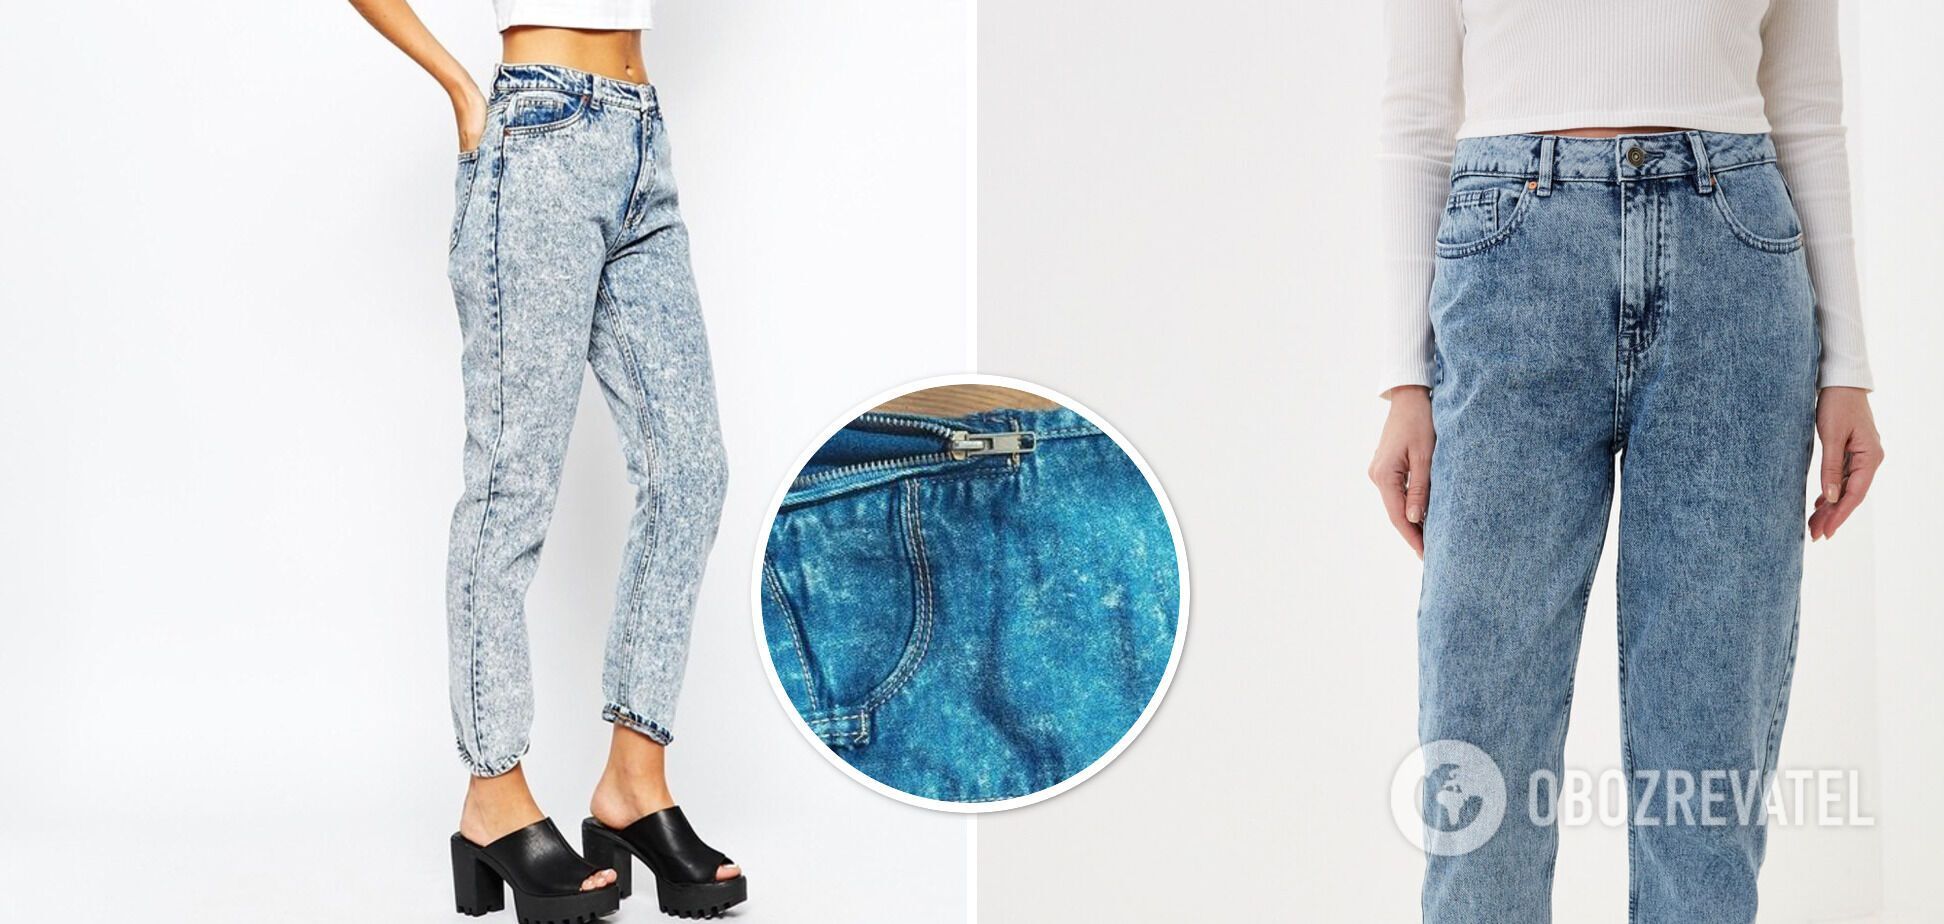 How to reshape stretched jeans: they'll look like new